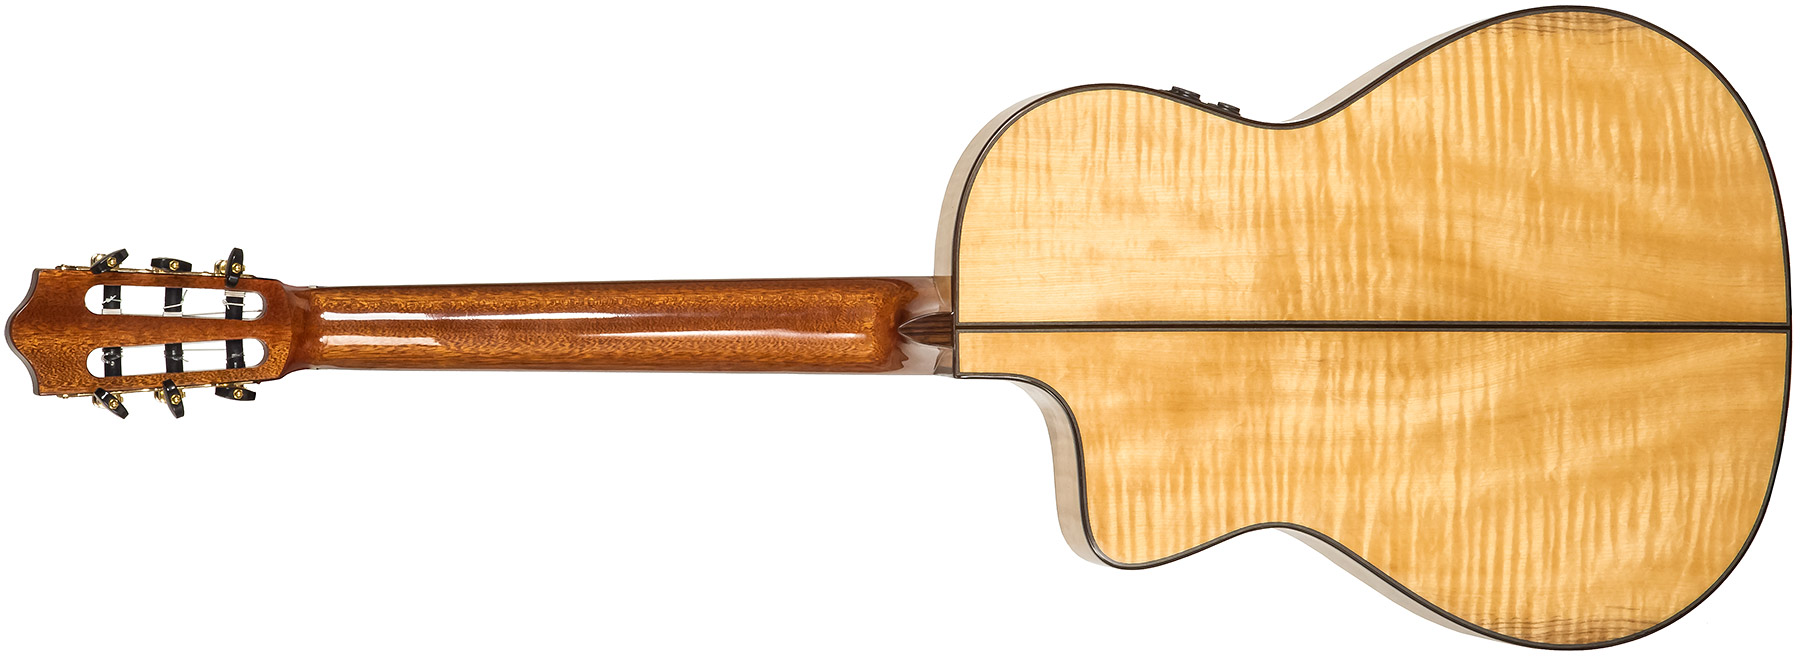 Martinez Crossover Mp14-mp Cw Epicea Erable Rw - Natural - Classical guitar 4/4 size - Variation 1